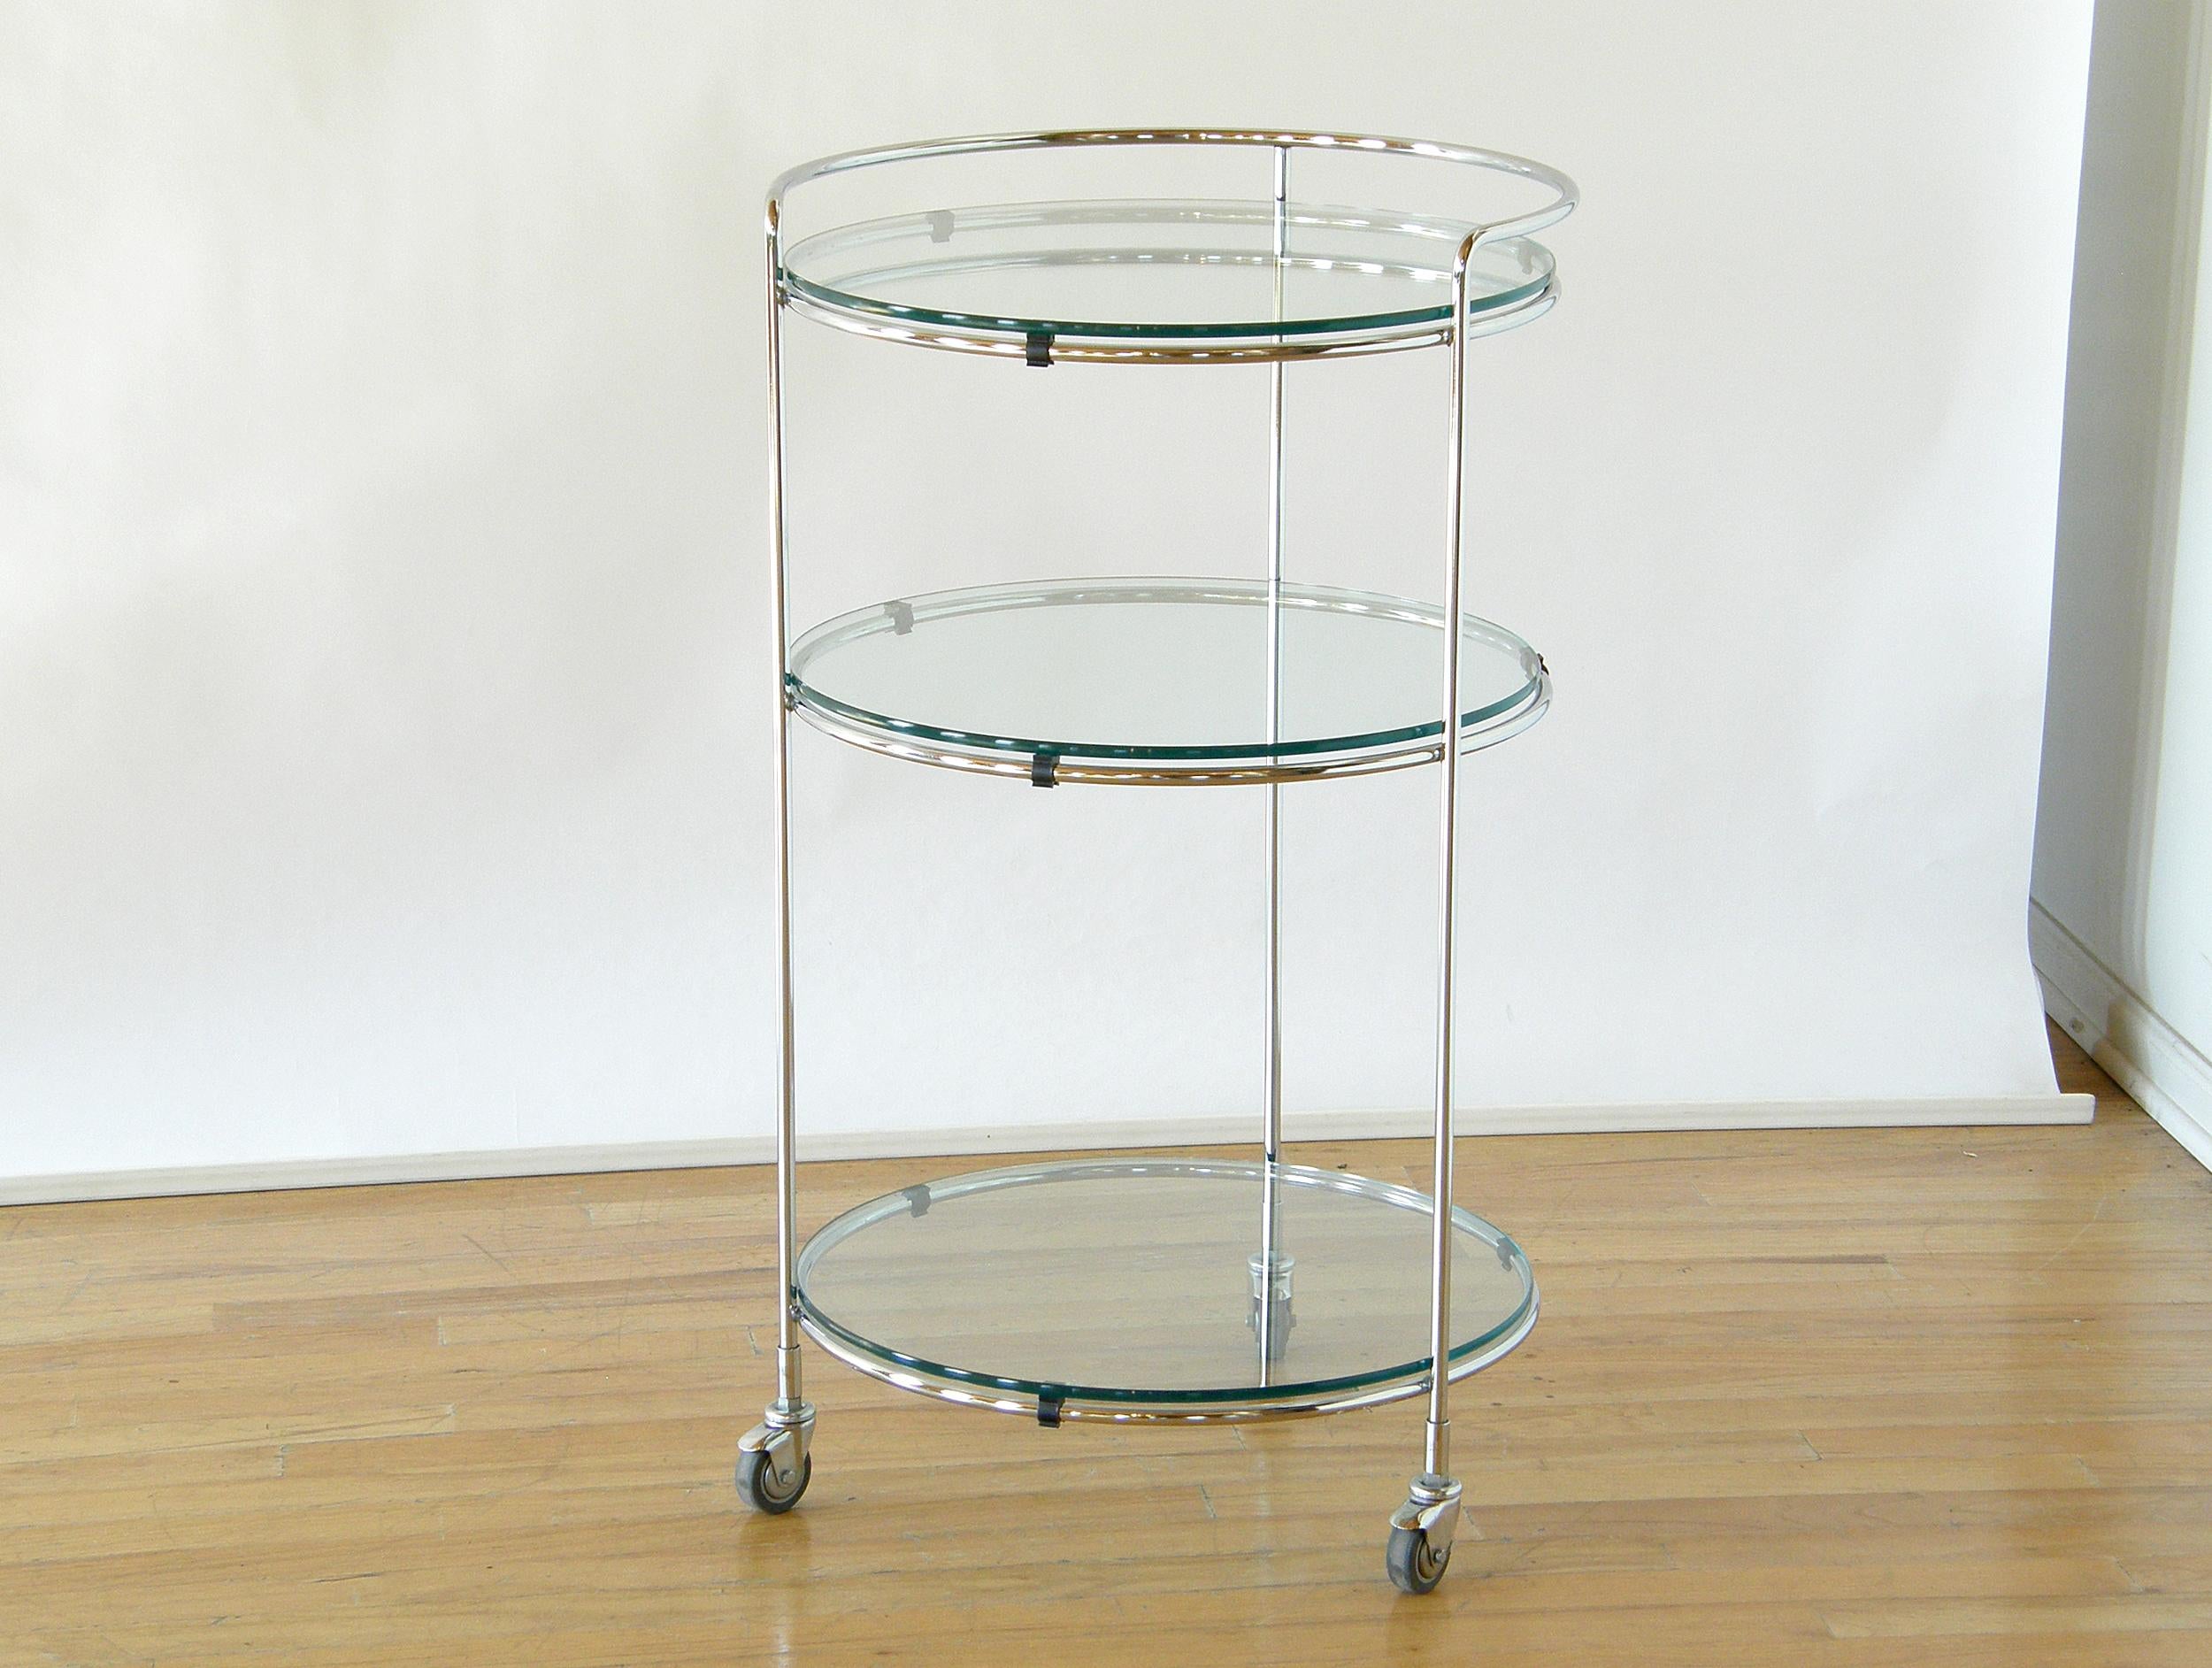 This compact, chrome serving cart has an elegant, Minimalist style. The slender, tubular chrome forms a skeletal framework that supports three glass shelves. The chrome extends above the top shelf part way around. It bends to form a rim that can be